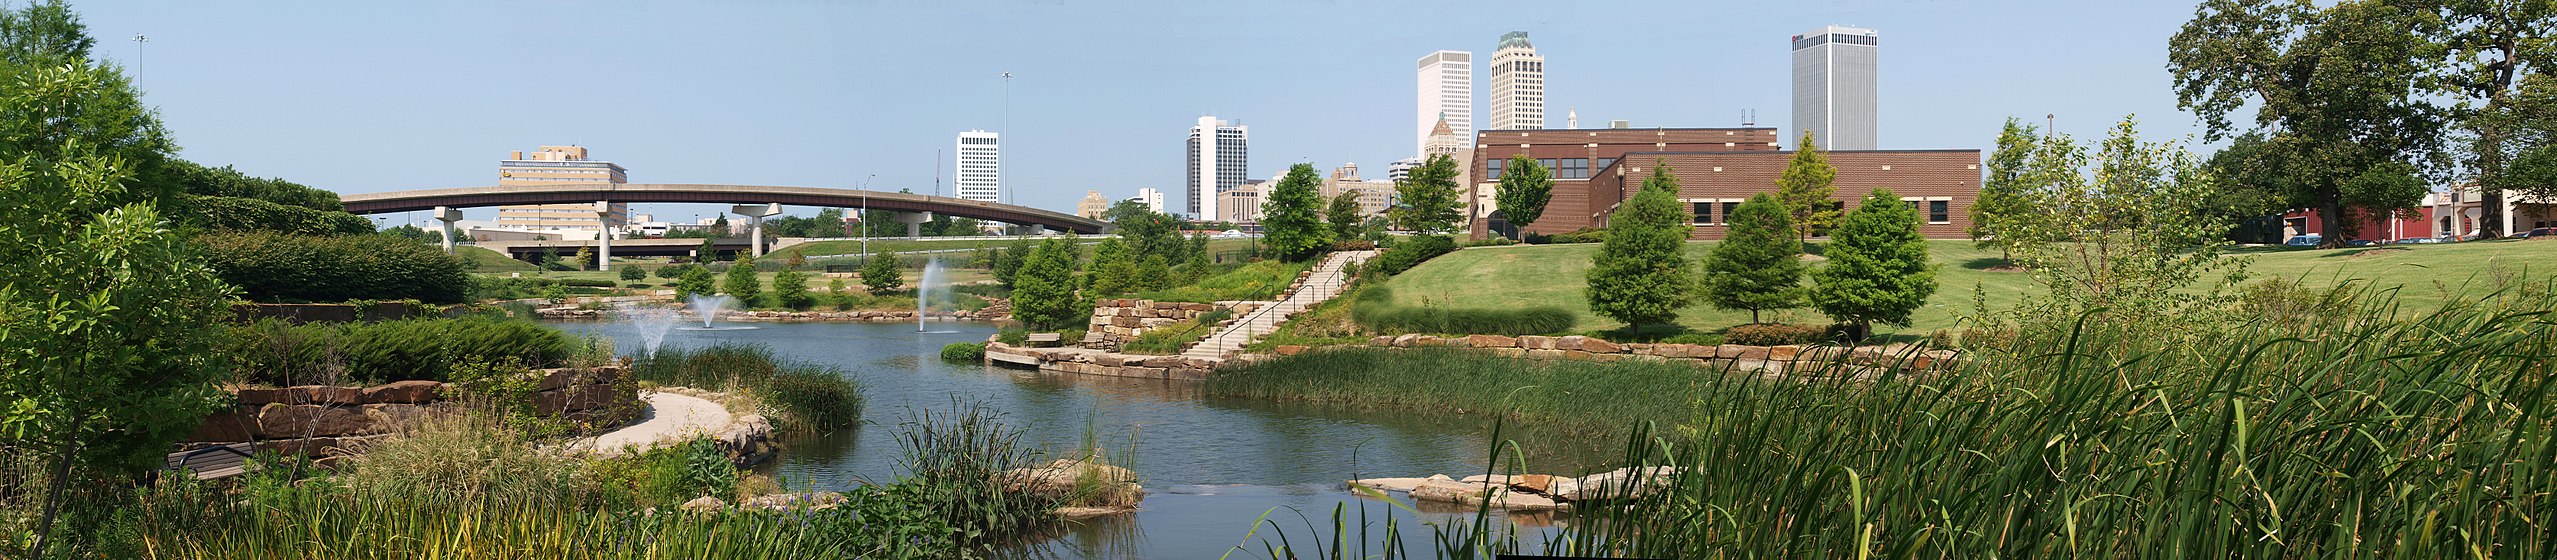 Central Park in Tulsa, Oklahoma. Credit: WikiCommons